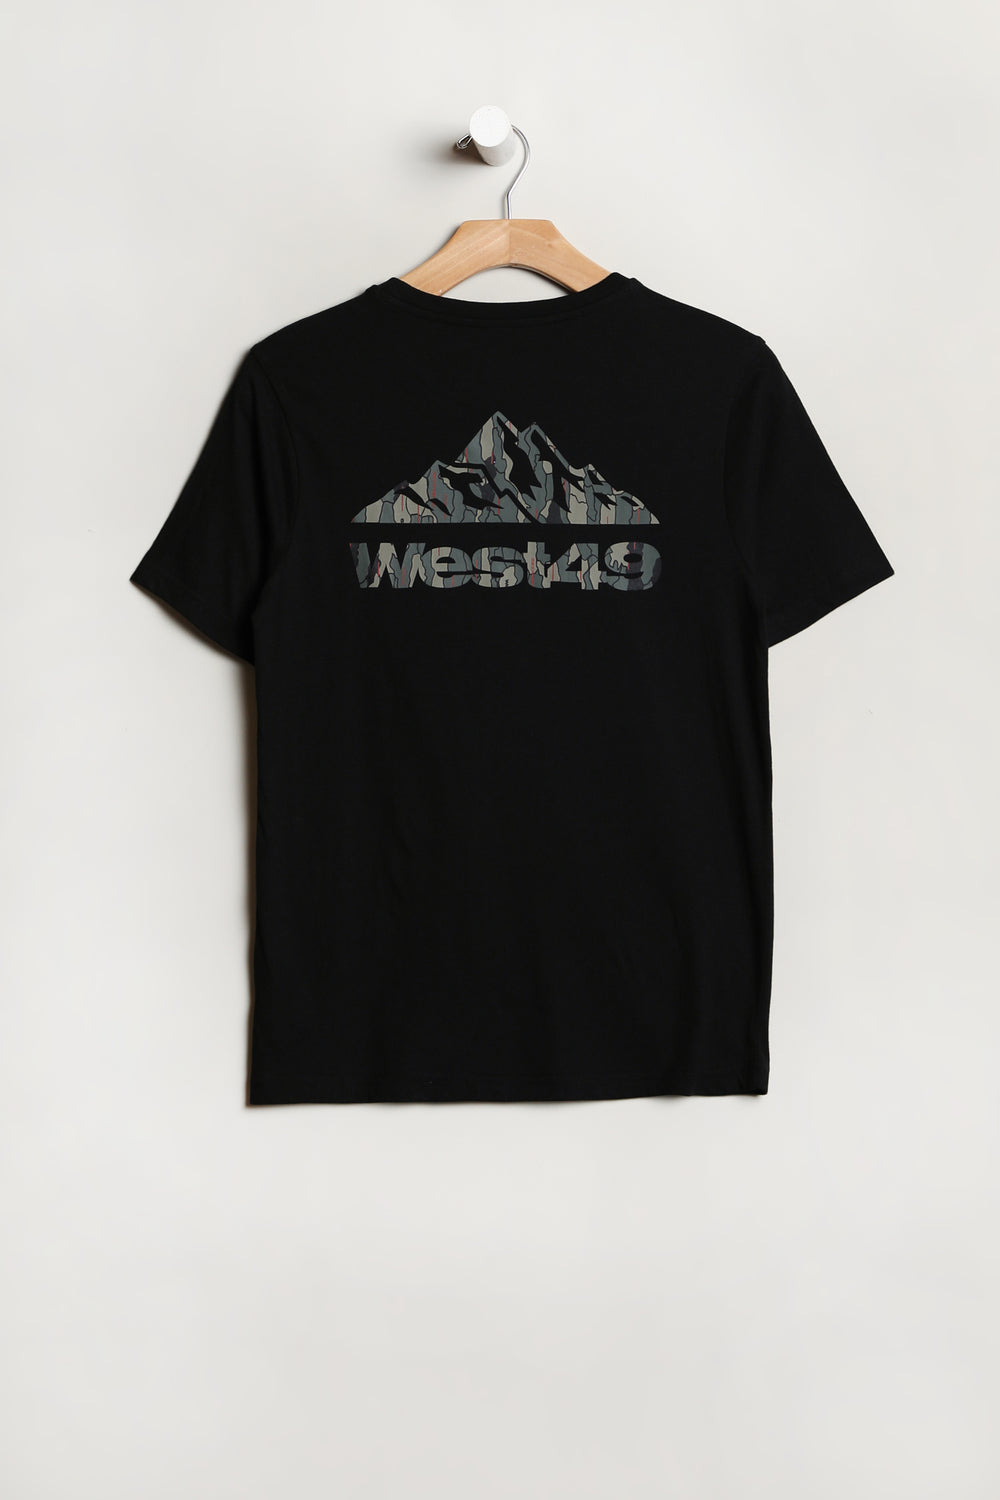 West49 Youth Mountain Camo T-Shirt West49 Youth Mountain Camo T-Shirt